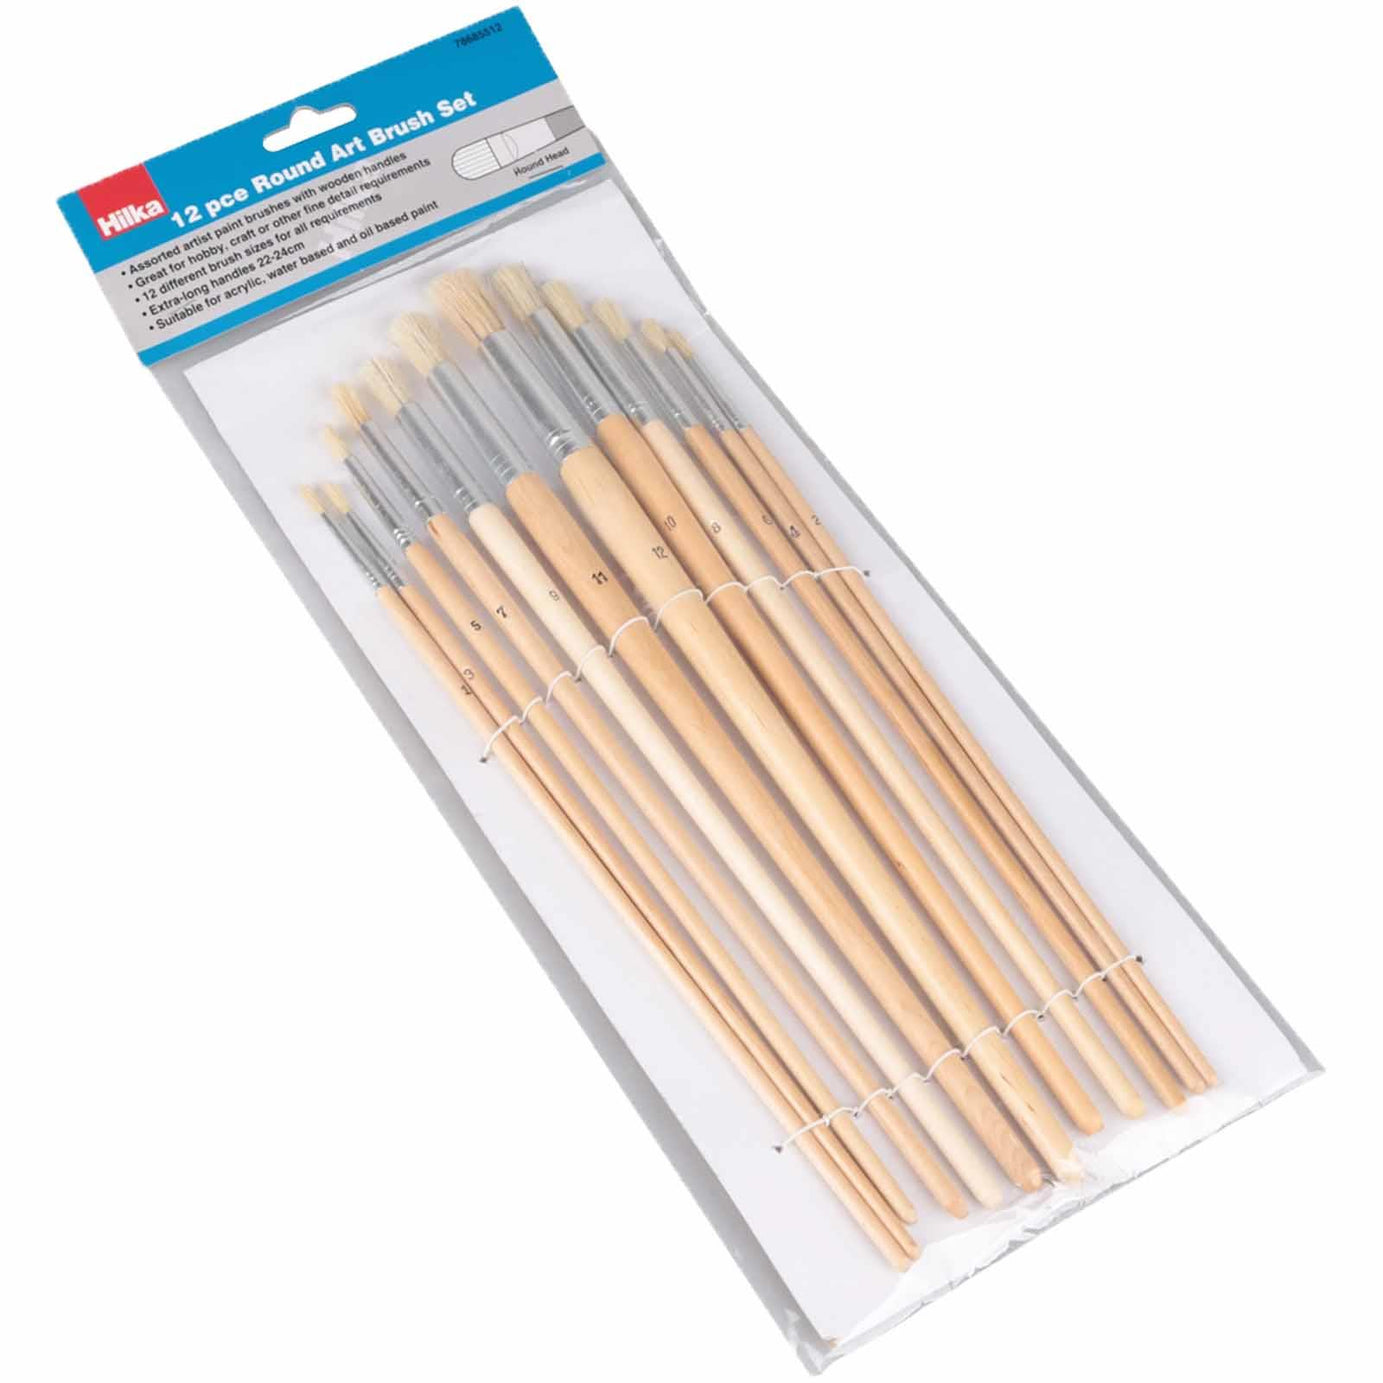 12 Pce Round Artist Paint Brushes Set Extra-long Handles 22-24cm Suitable For Acrylic, Water Based And Oil Based Paint